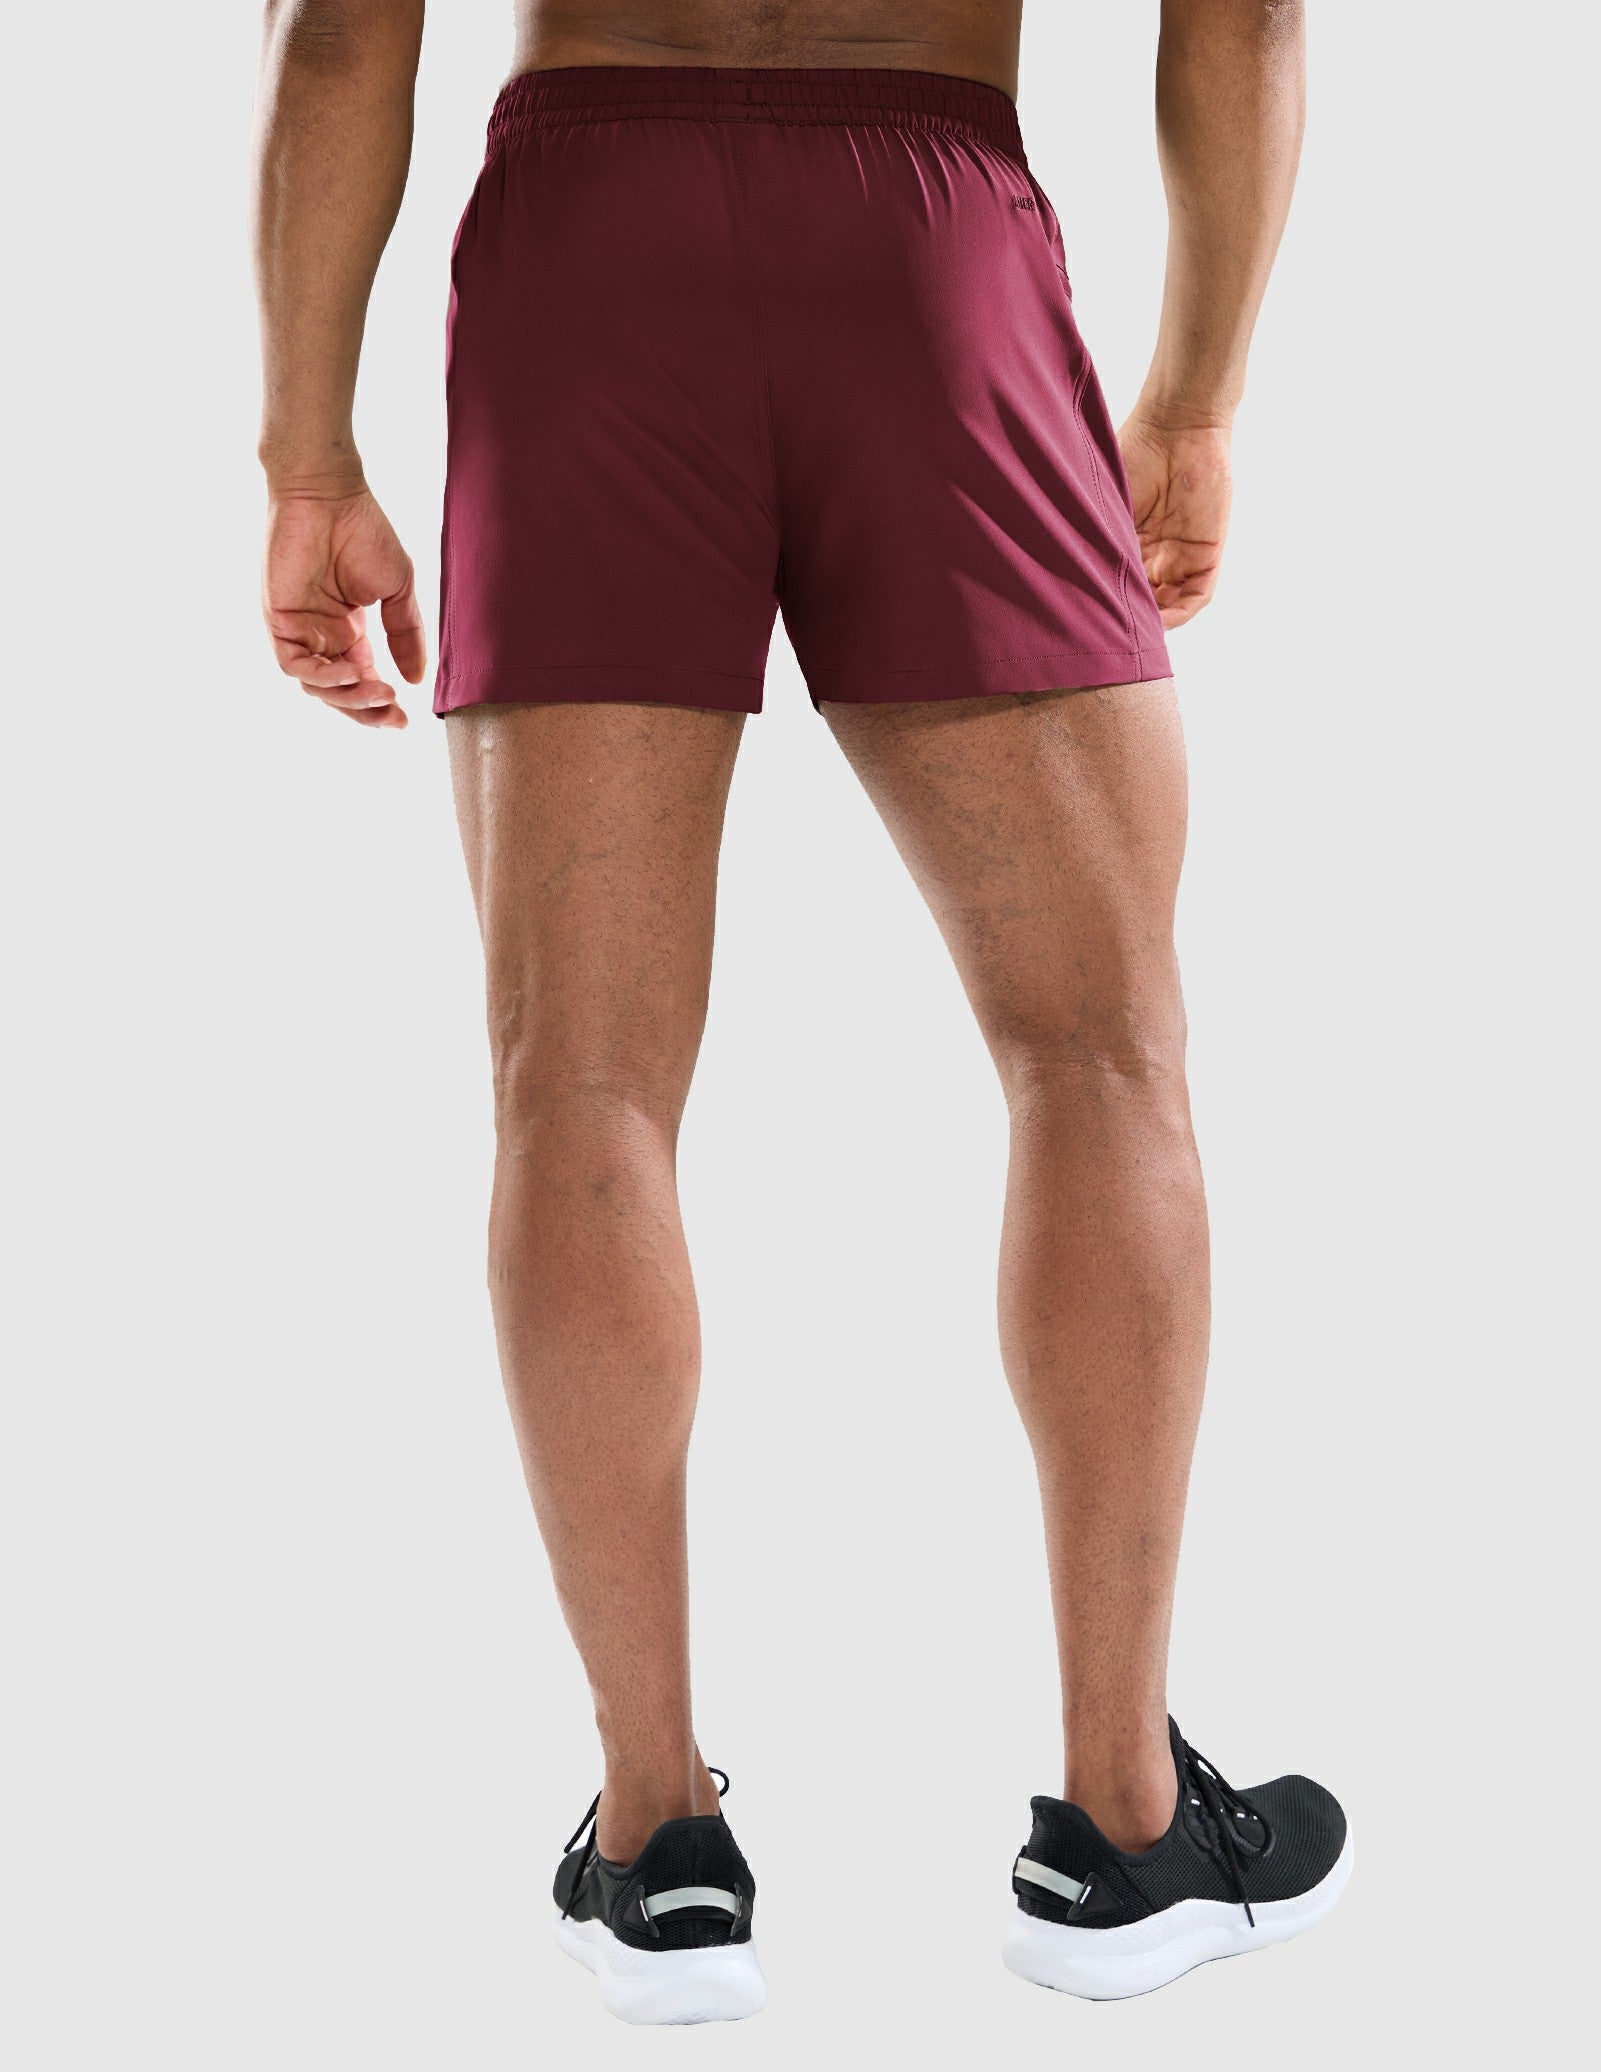 Men's 3 Inch Athletic Running Shorts with Brief Liner